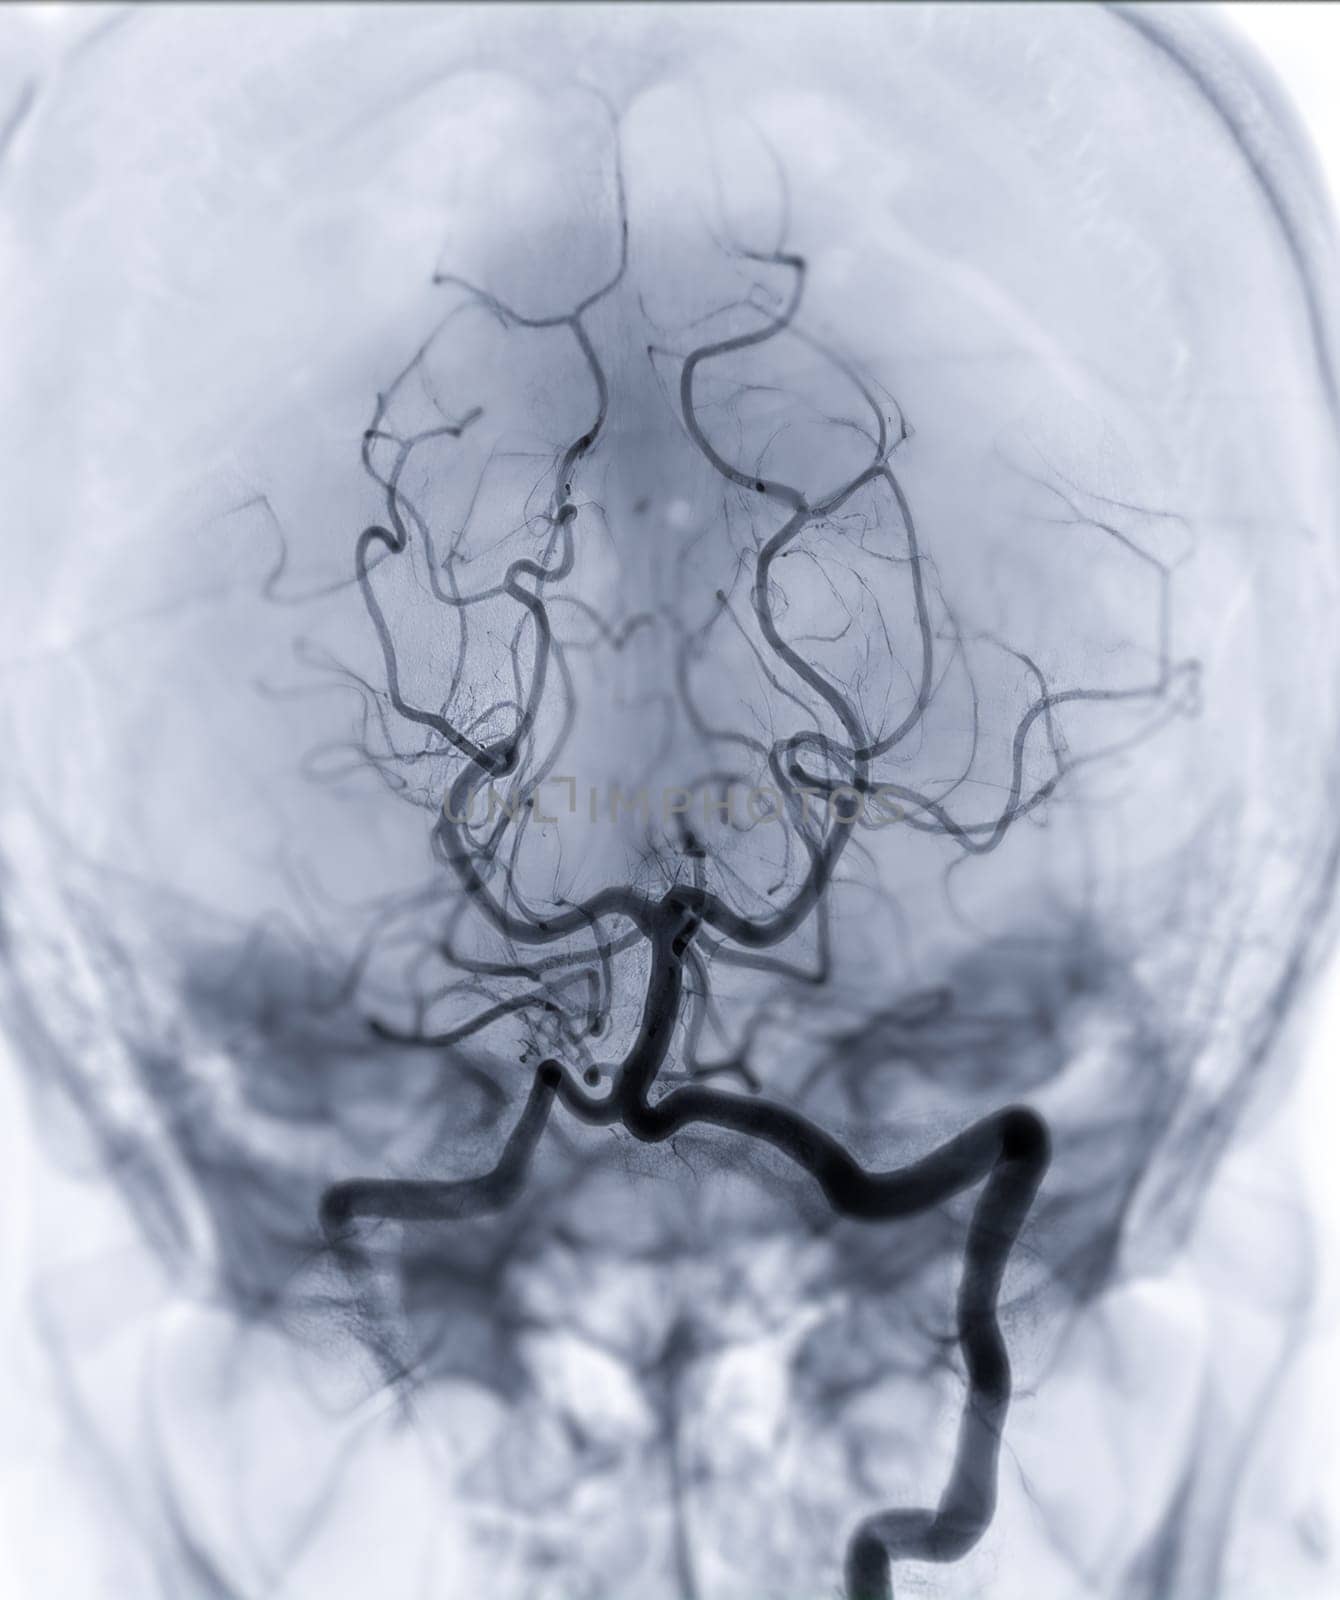 Cerebral angiography  imageor potesterior cerebral artery from Fluoroscopy in intervention radiology  showing Basilar artery. by samunella